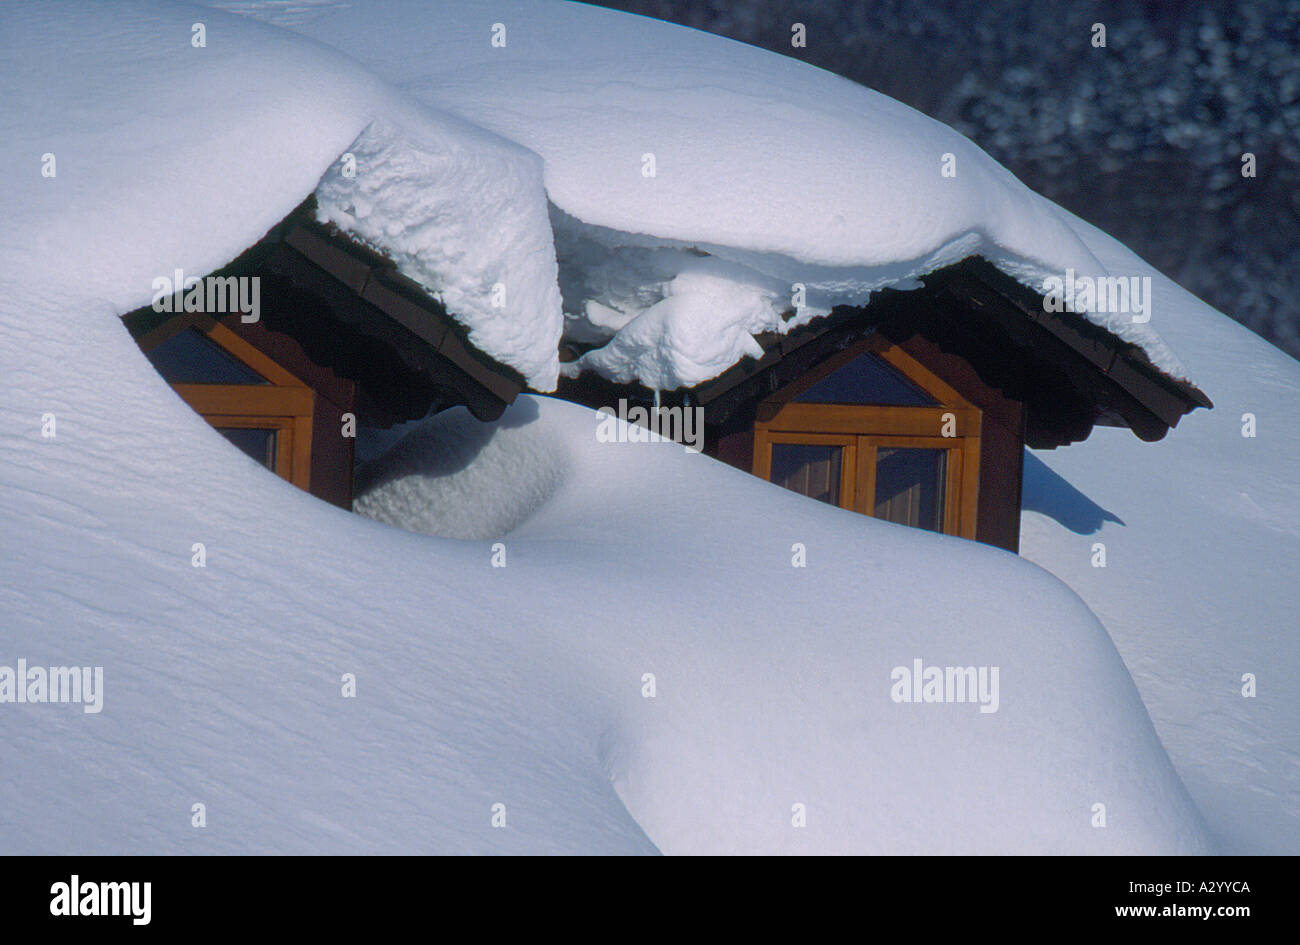 two attic windows on roof of Bavarian House, covered by snow. Photo by Willy Matheisl Stock Photo